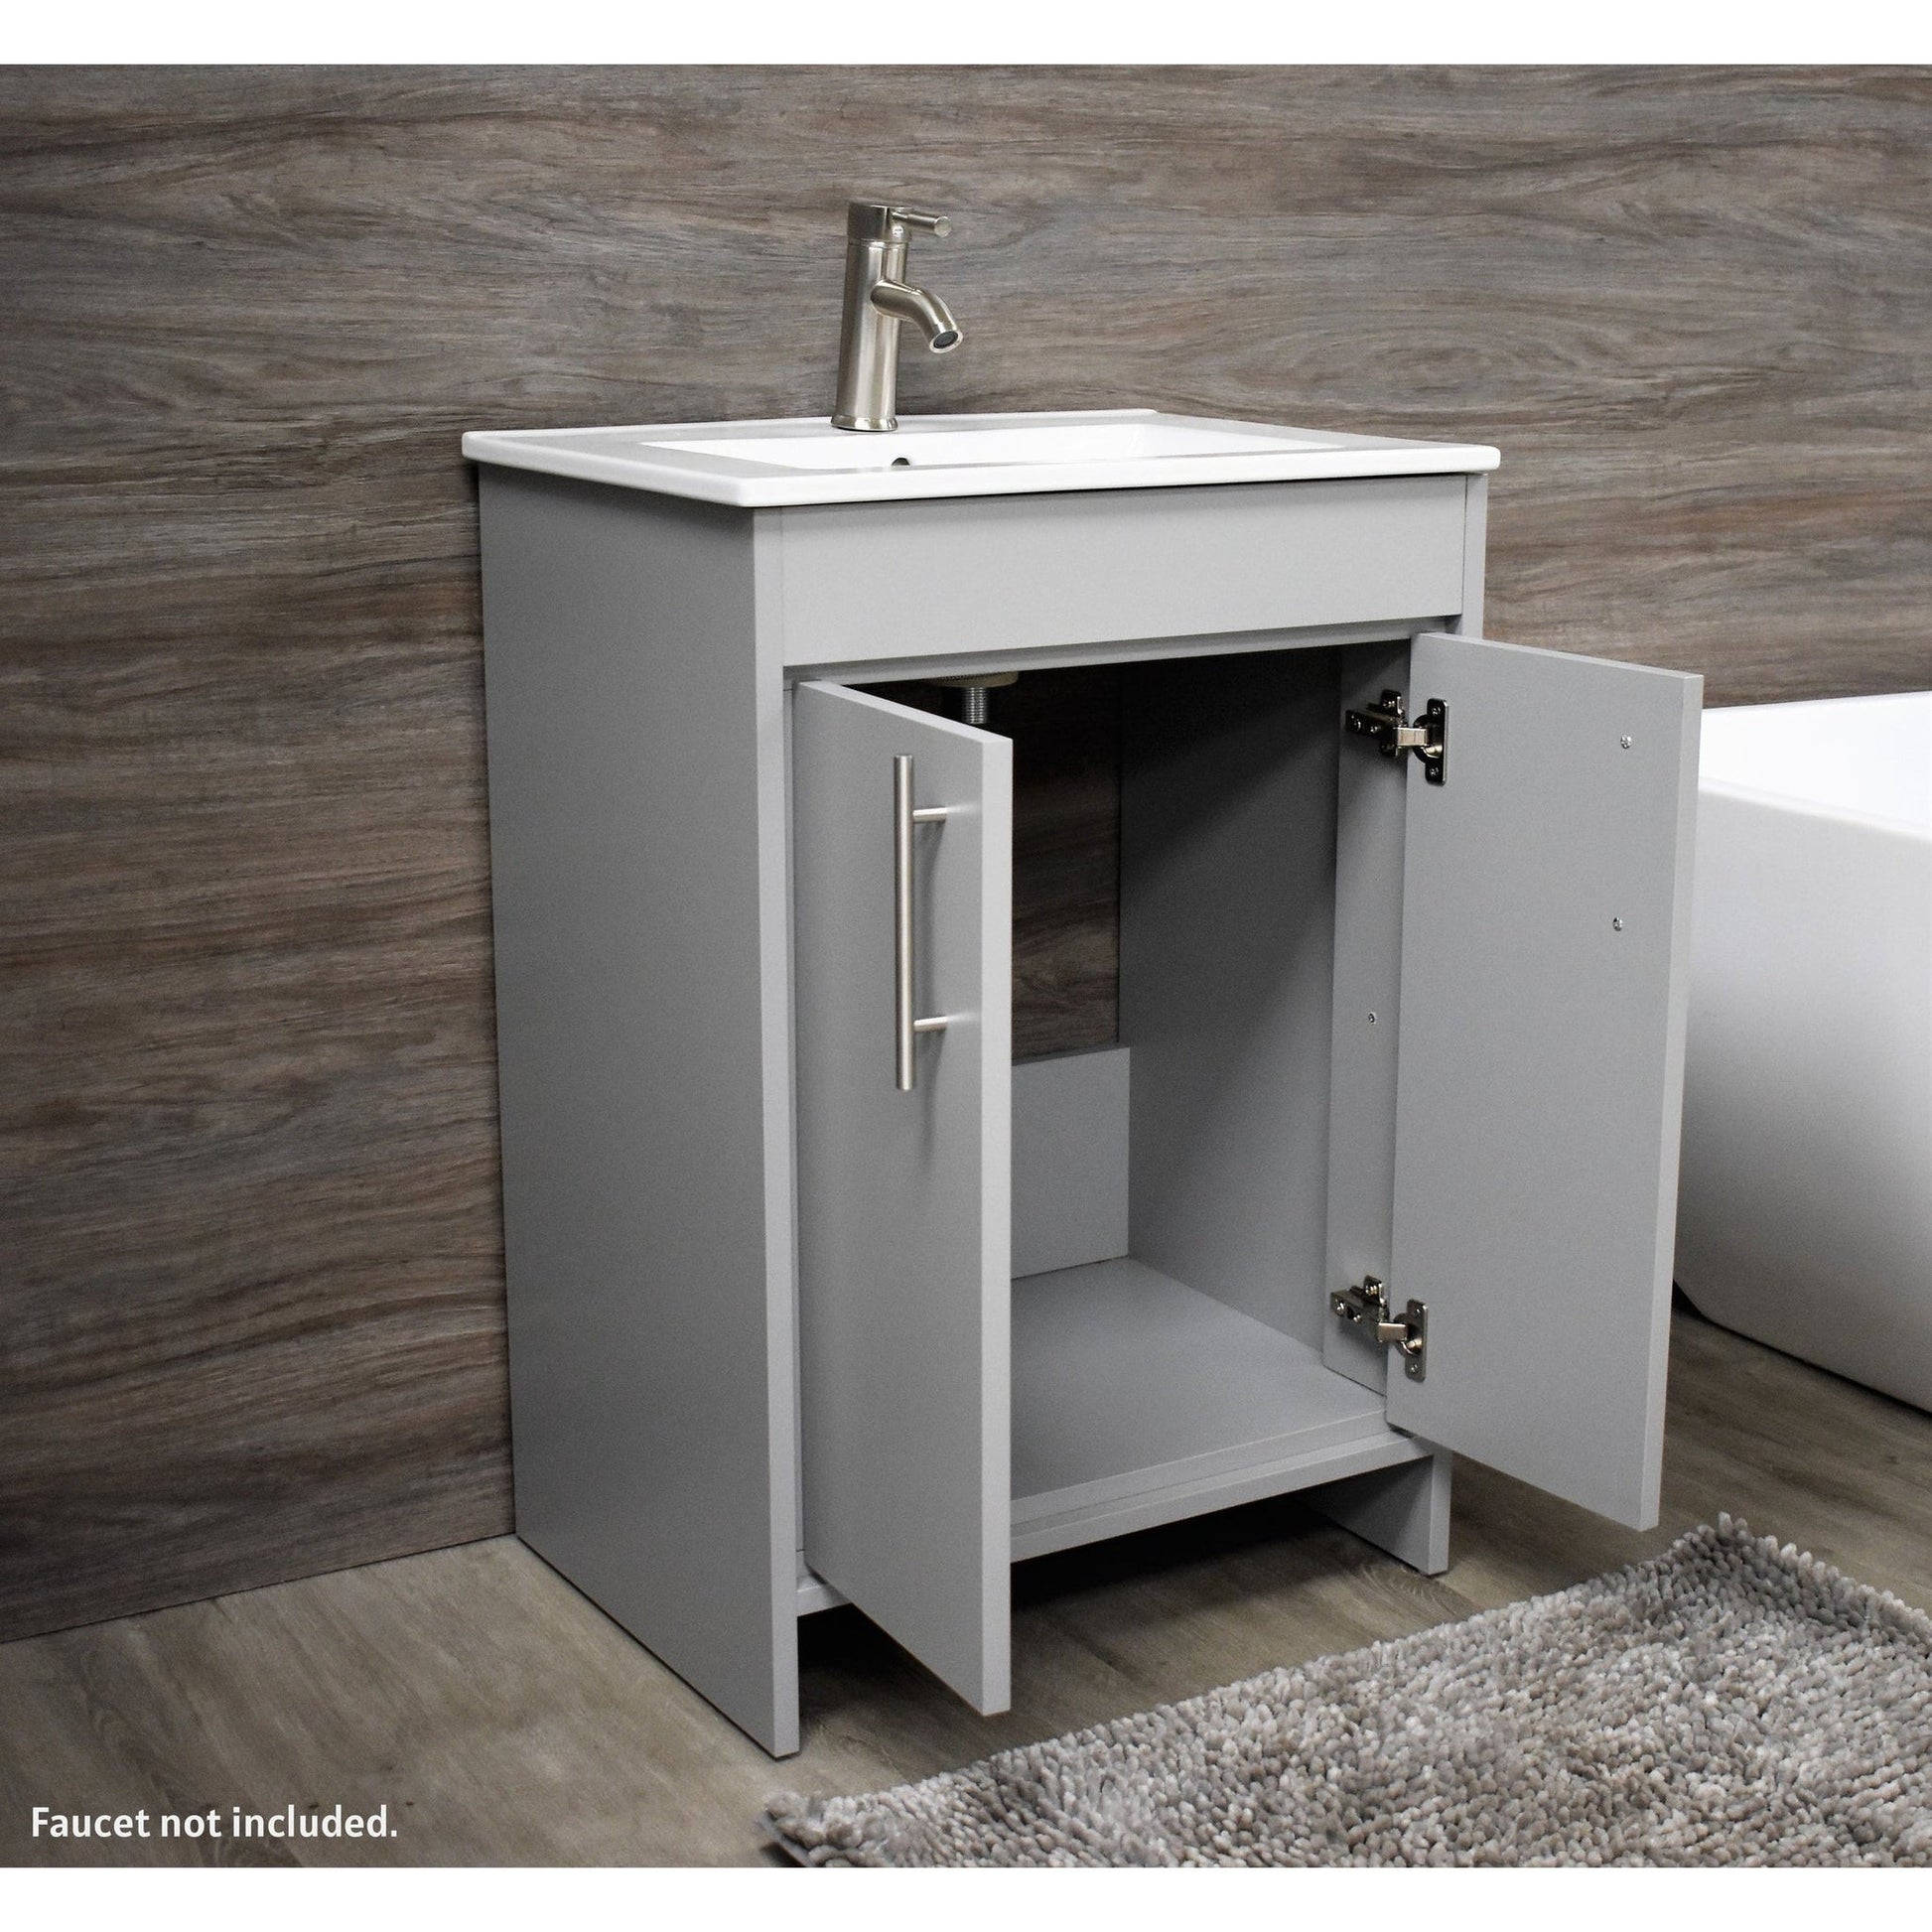 Volpa USA Villa 24" Gray Freestanding Modern Bathroom Vanity With Integrated Ceramic Top and Brushed Nickel Round Handles